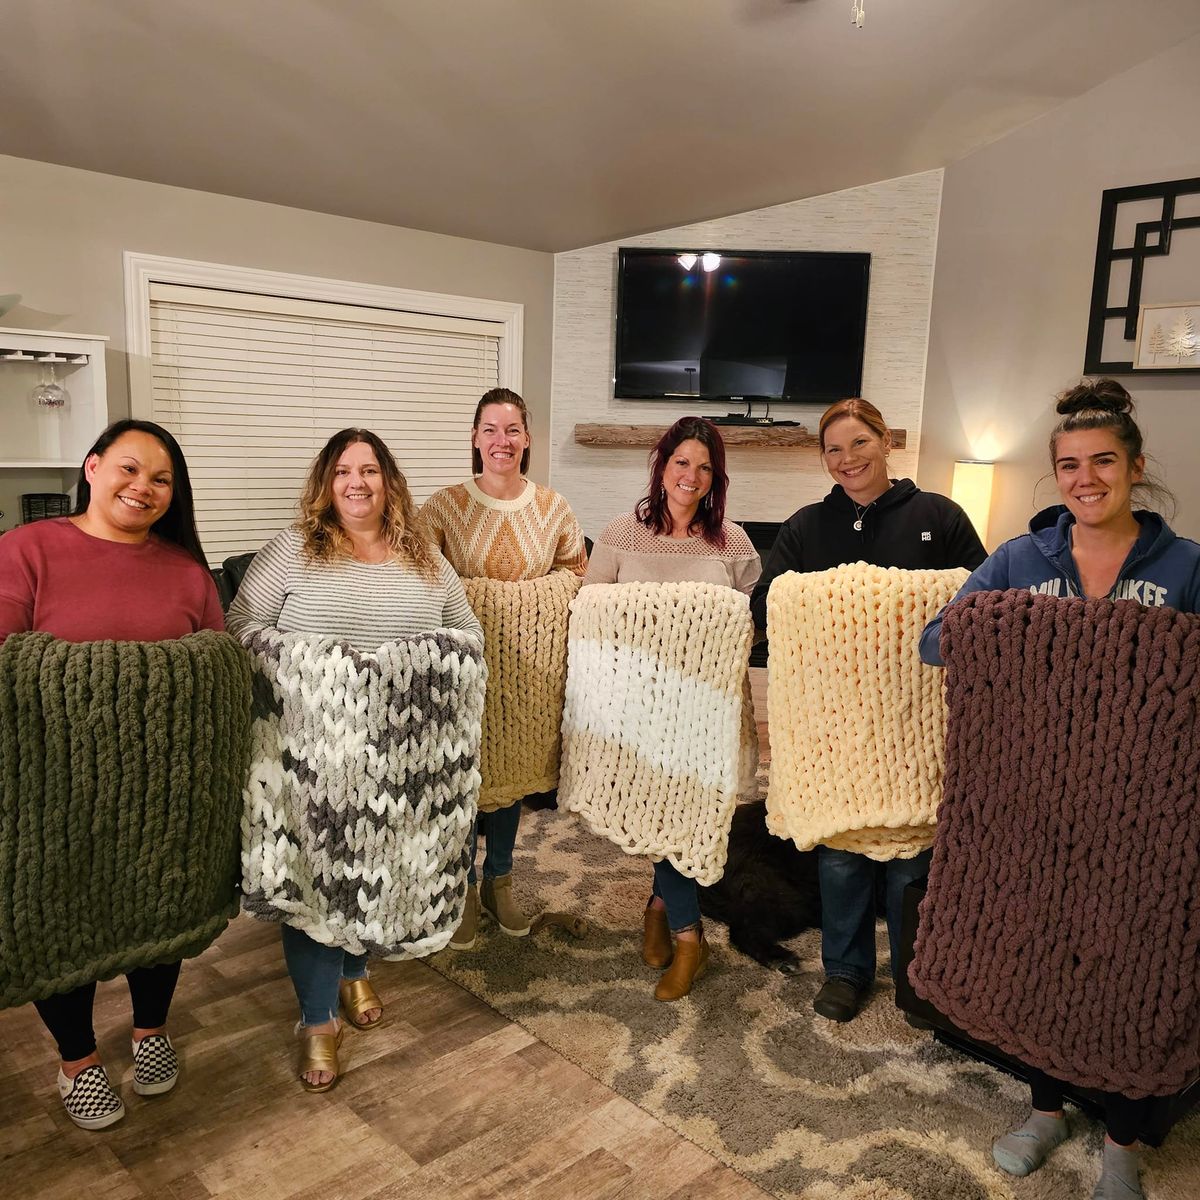 SOLD OUT! July 9th - 3 Sheeps Brewing Co. Chunky Knit Blanket Workshop